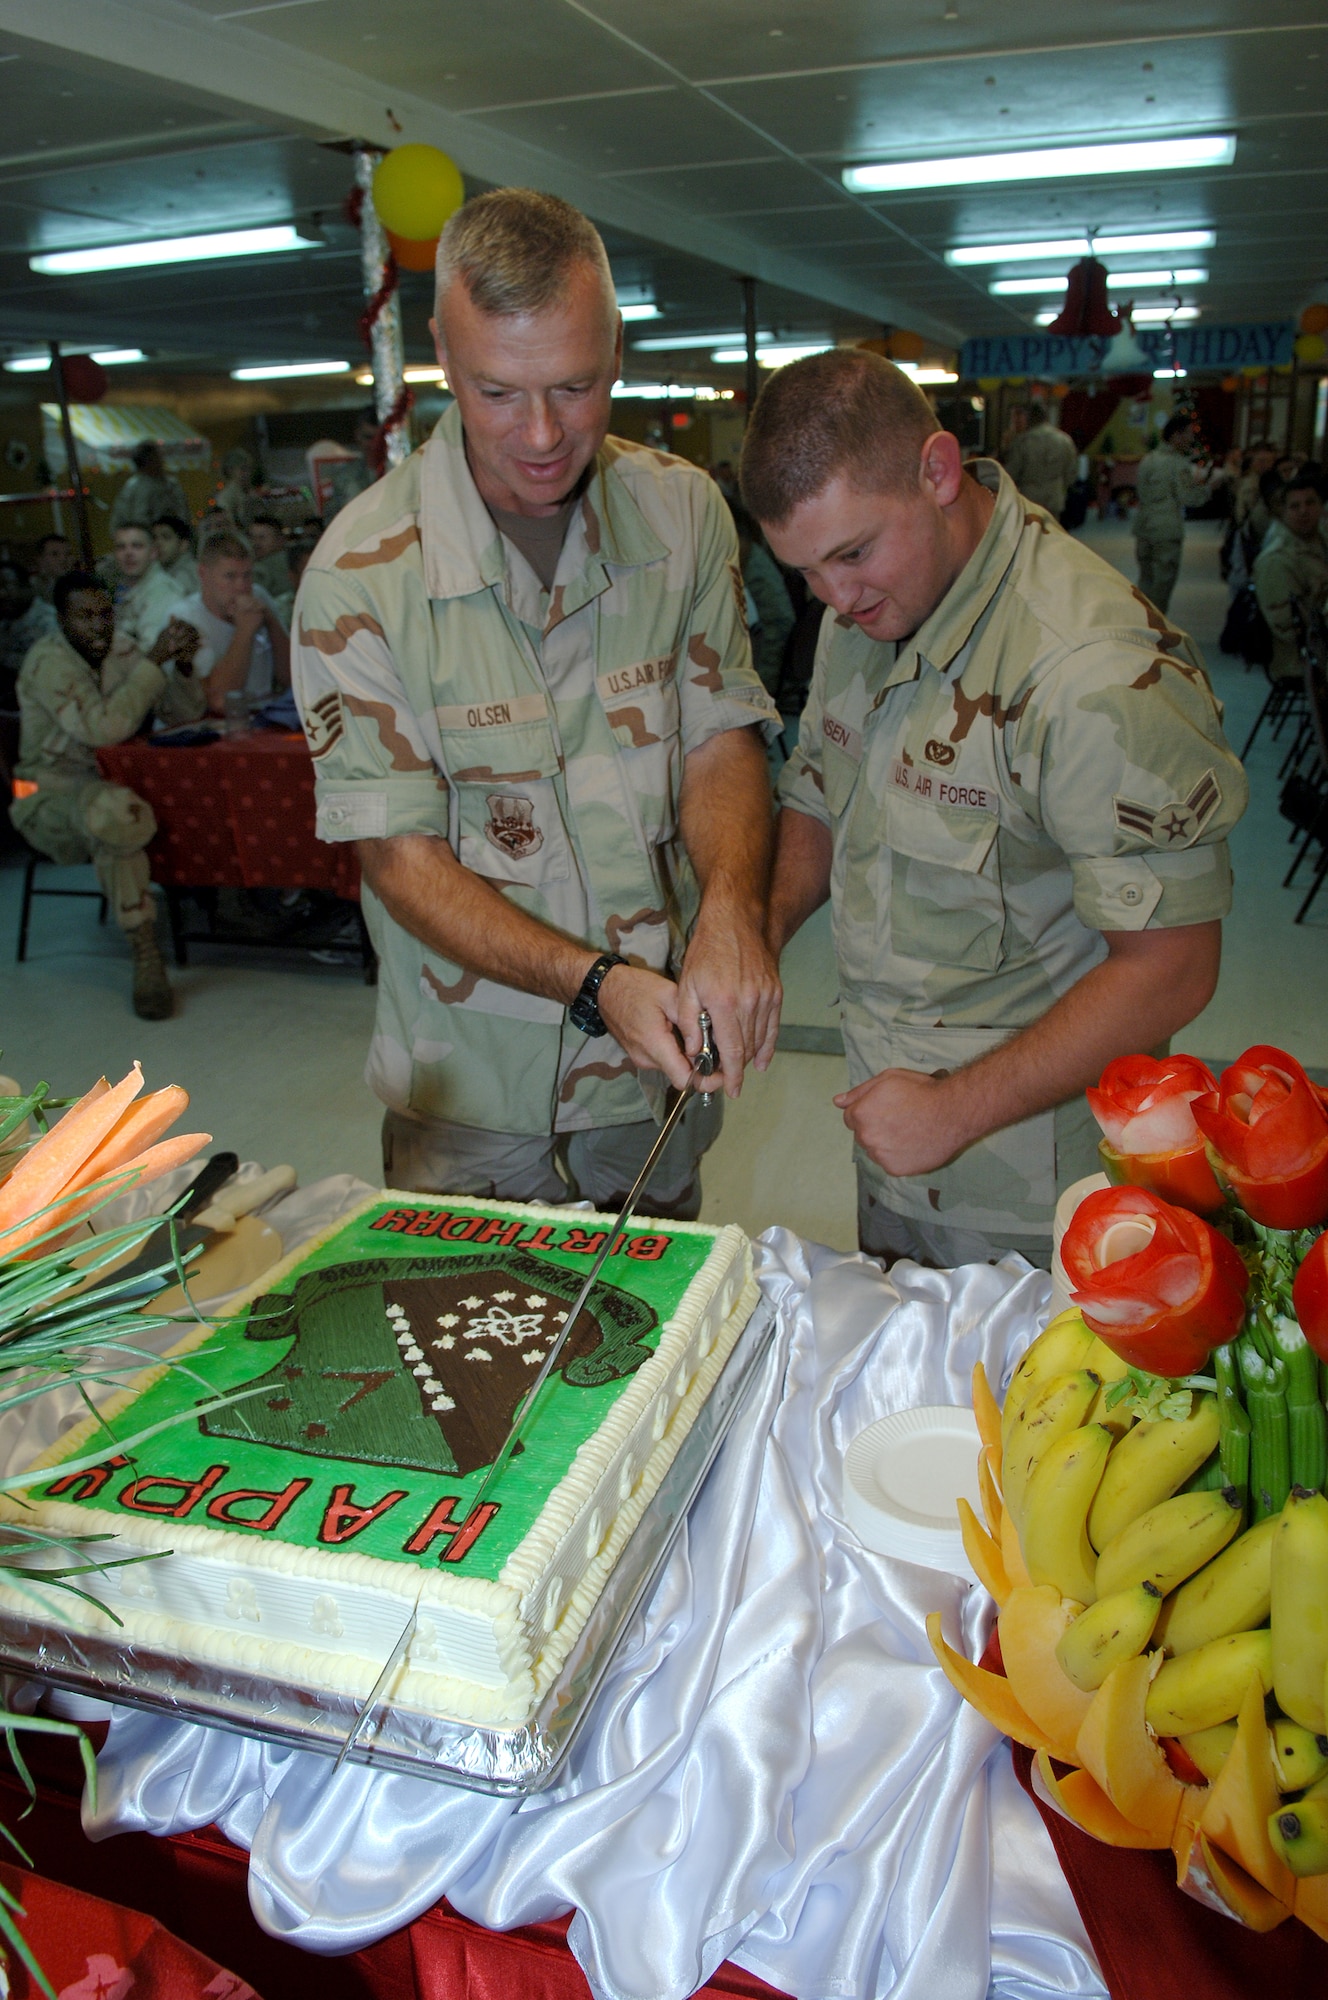 SOUTHWEST ASIA - Staff Sgt. Douglas Olsen, 379th Air Expeditionary Wing Public Affairs, and Airman 1st Class Nicholas Jansen, 379th Expeditionary Civil Engineer Squadron, cut the birthday cake as the oldest and youngest Airman celebrating a birthday in the month of December during a birthday dinner hosted by senior noncommissioned officers and officers at a Southwest Asia air base. Sergeant Olsen is deployed from Camp Murray, Wash. and Airman Jansen is deployed from Ramstein AB, Germany. (U.S.Air Force photo/Master Sgt. Greg Kunkle)